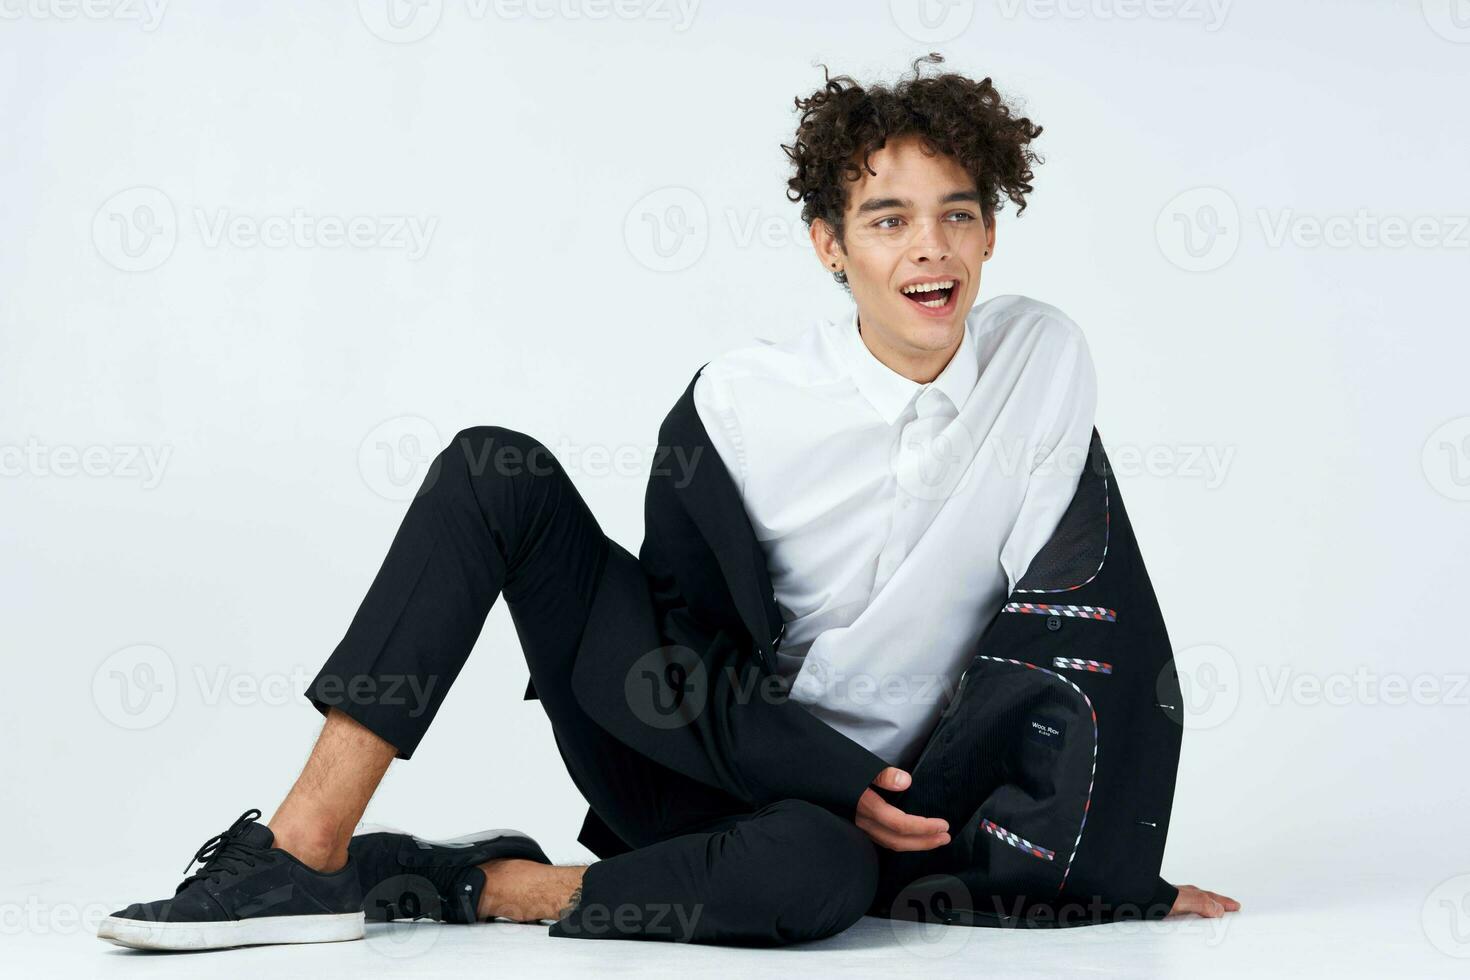 guy in a white shirt sitting on the floor curly hair photo